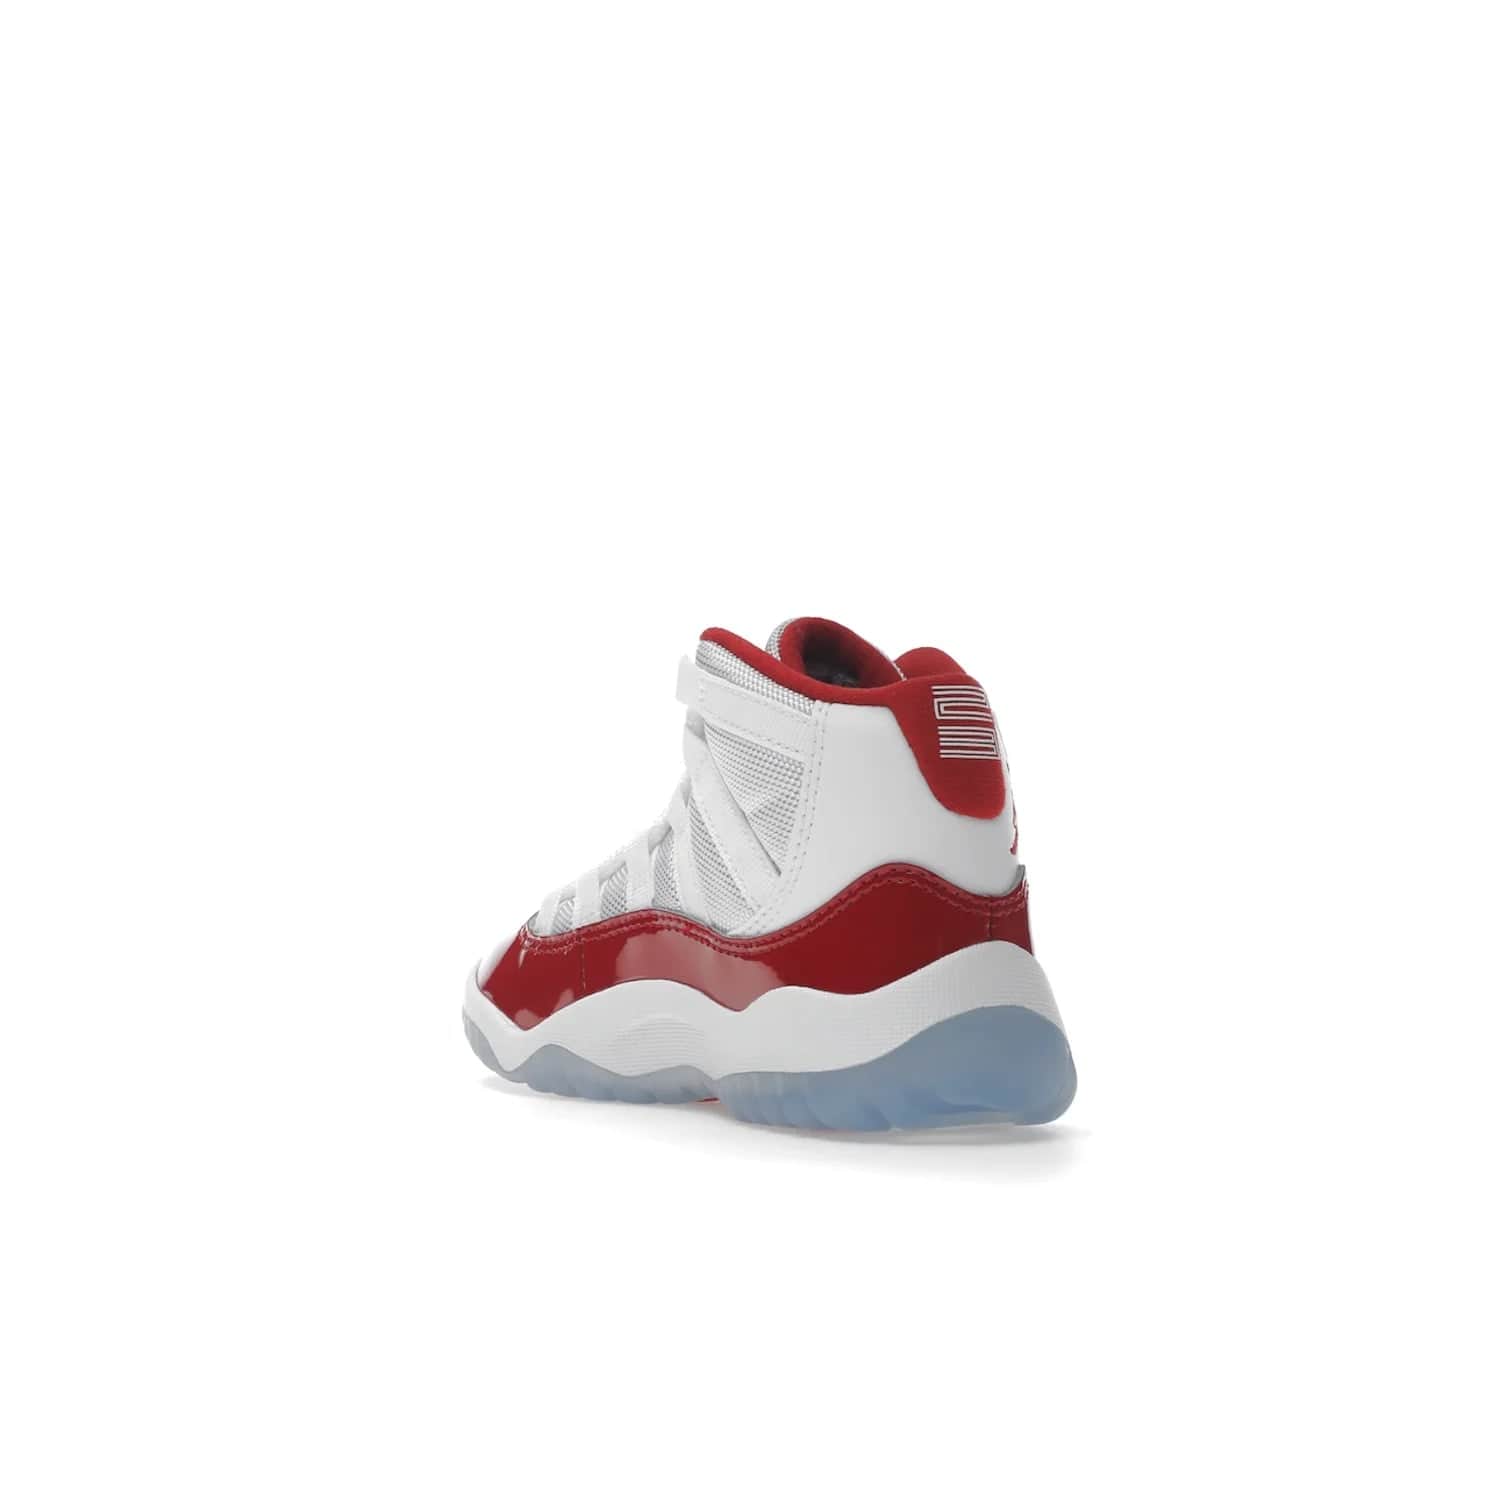 Jordan 11 Retro Cherry (2022) (PS) - Image 25 - Only at www.BallersClubKickz.com - An iconic silhouette with a timeless look, the Air Jordan 11 Retro Cherry 2022 PS features a crisp White, Varsity Red and Black colorway. The upper is made of ballistic mesh, a red patent leather mudguard, '23' branding and white Phylon midsole. Get optimal cushioning and comfort on December 10th, 2022. Don't miss out.